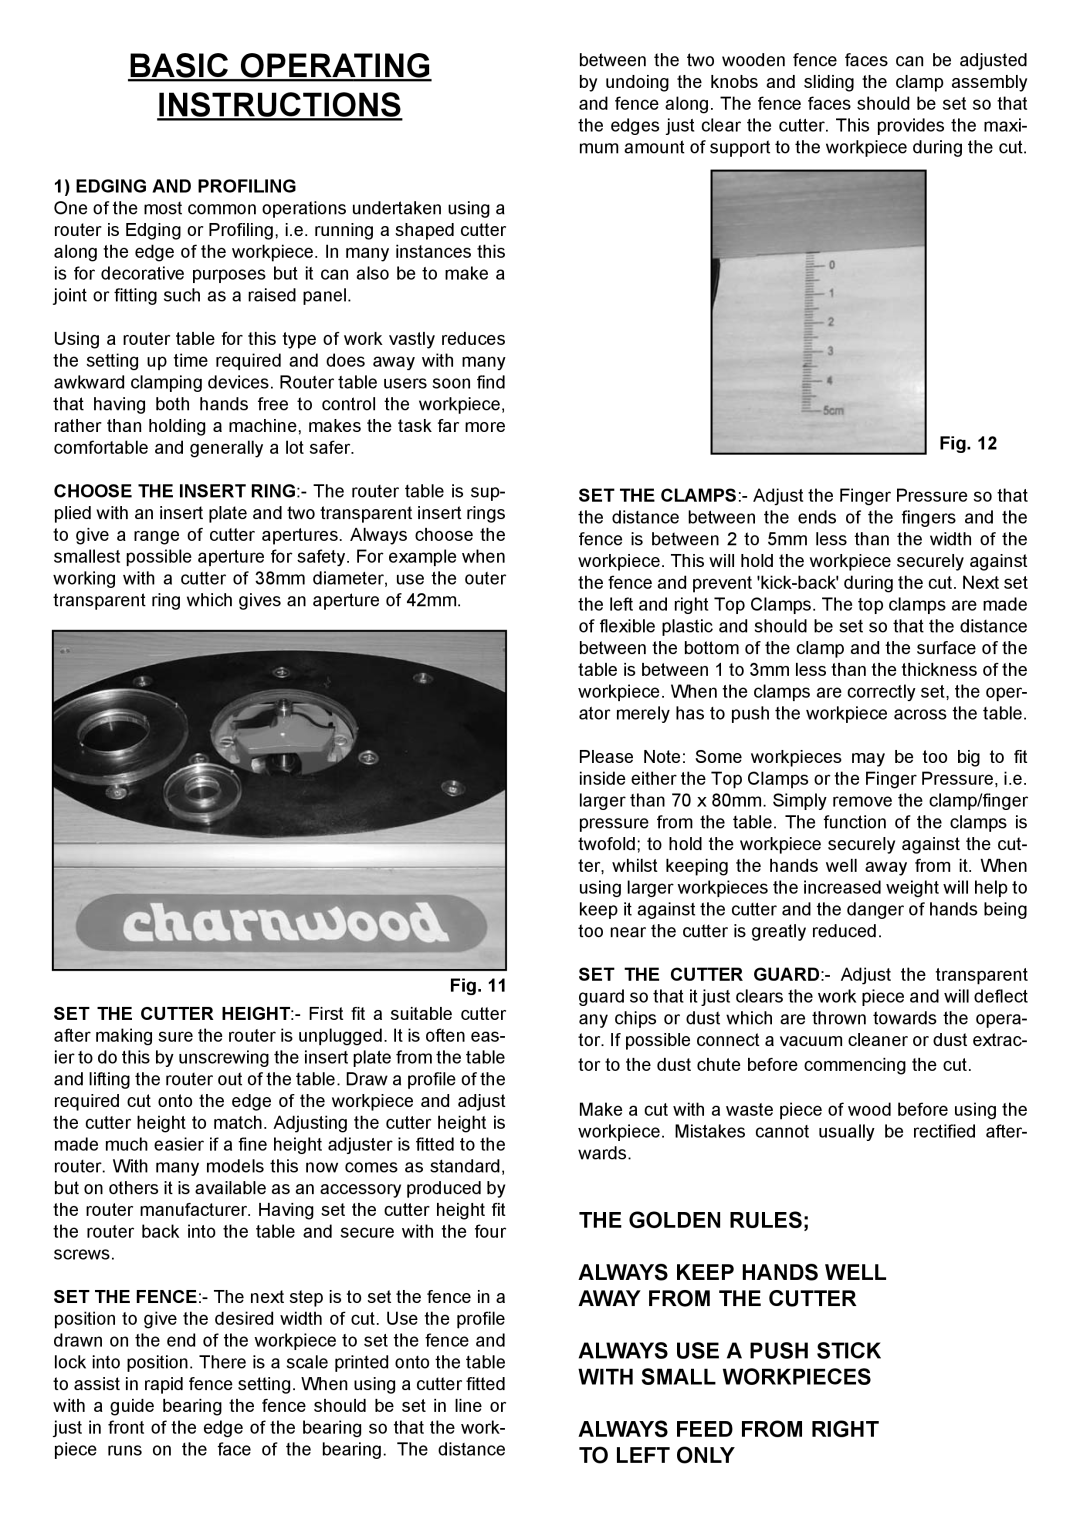 Charnwood W013 Basic Operating Instructions, The Golden Rules Always Keep Hands Well Away From The Cutter, To Left Only 